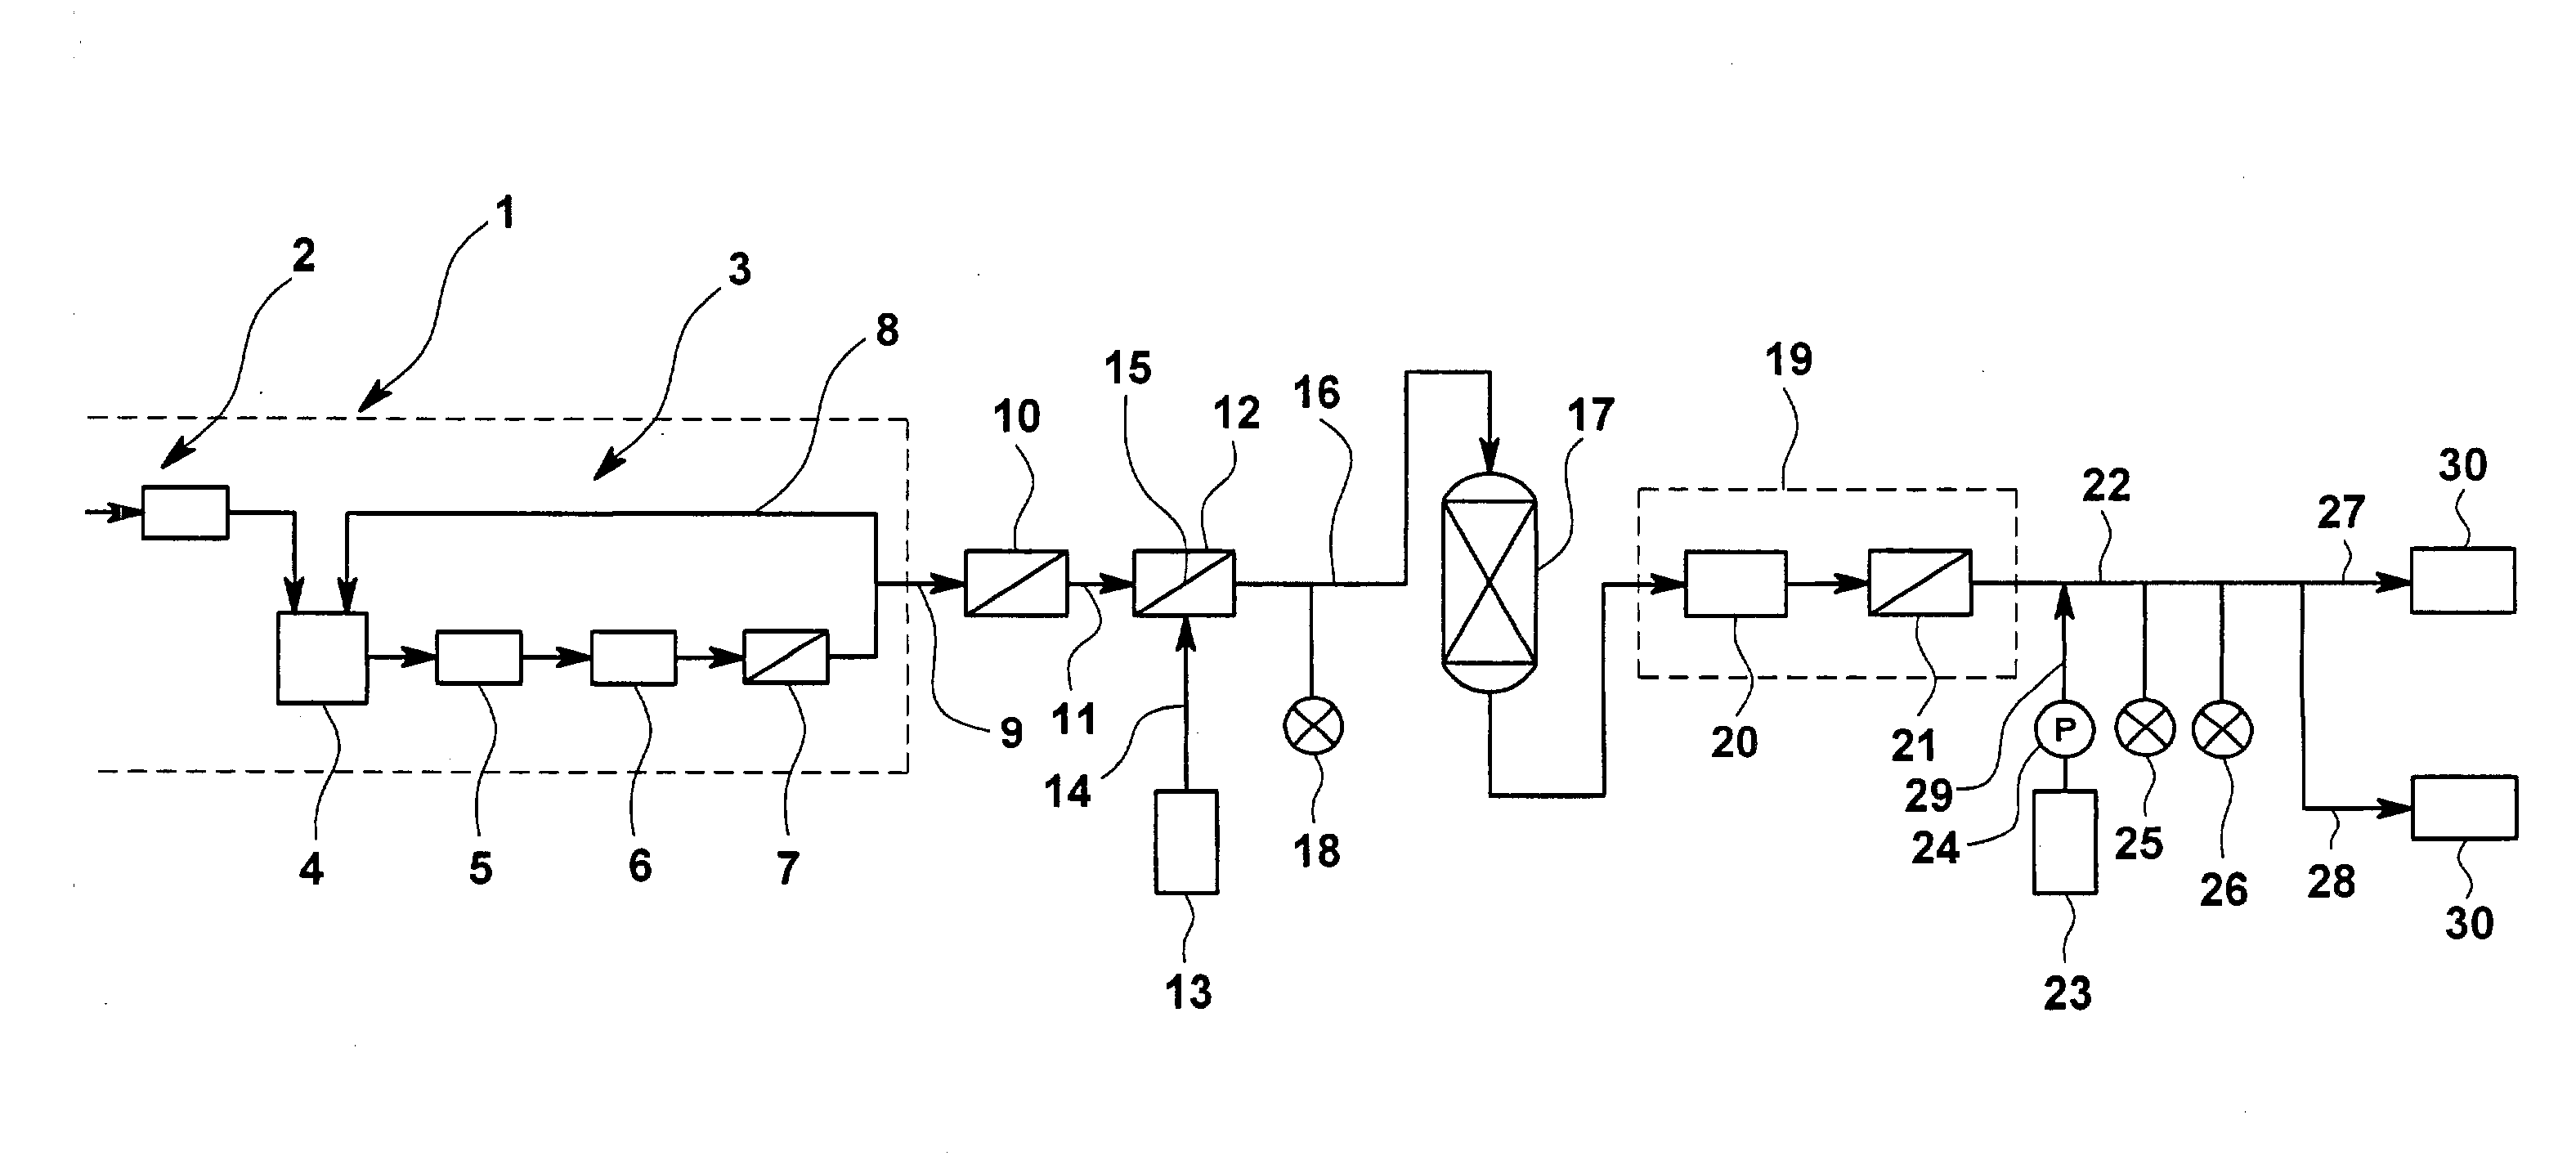 Hydrogen-dissolved water production apparatus